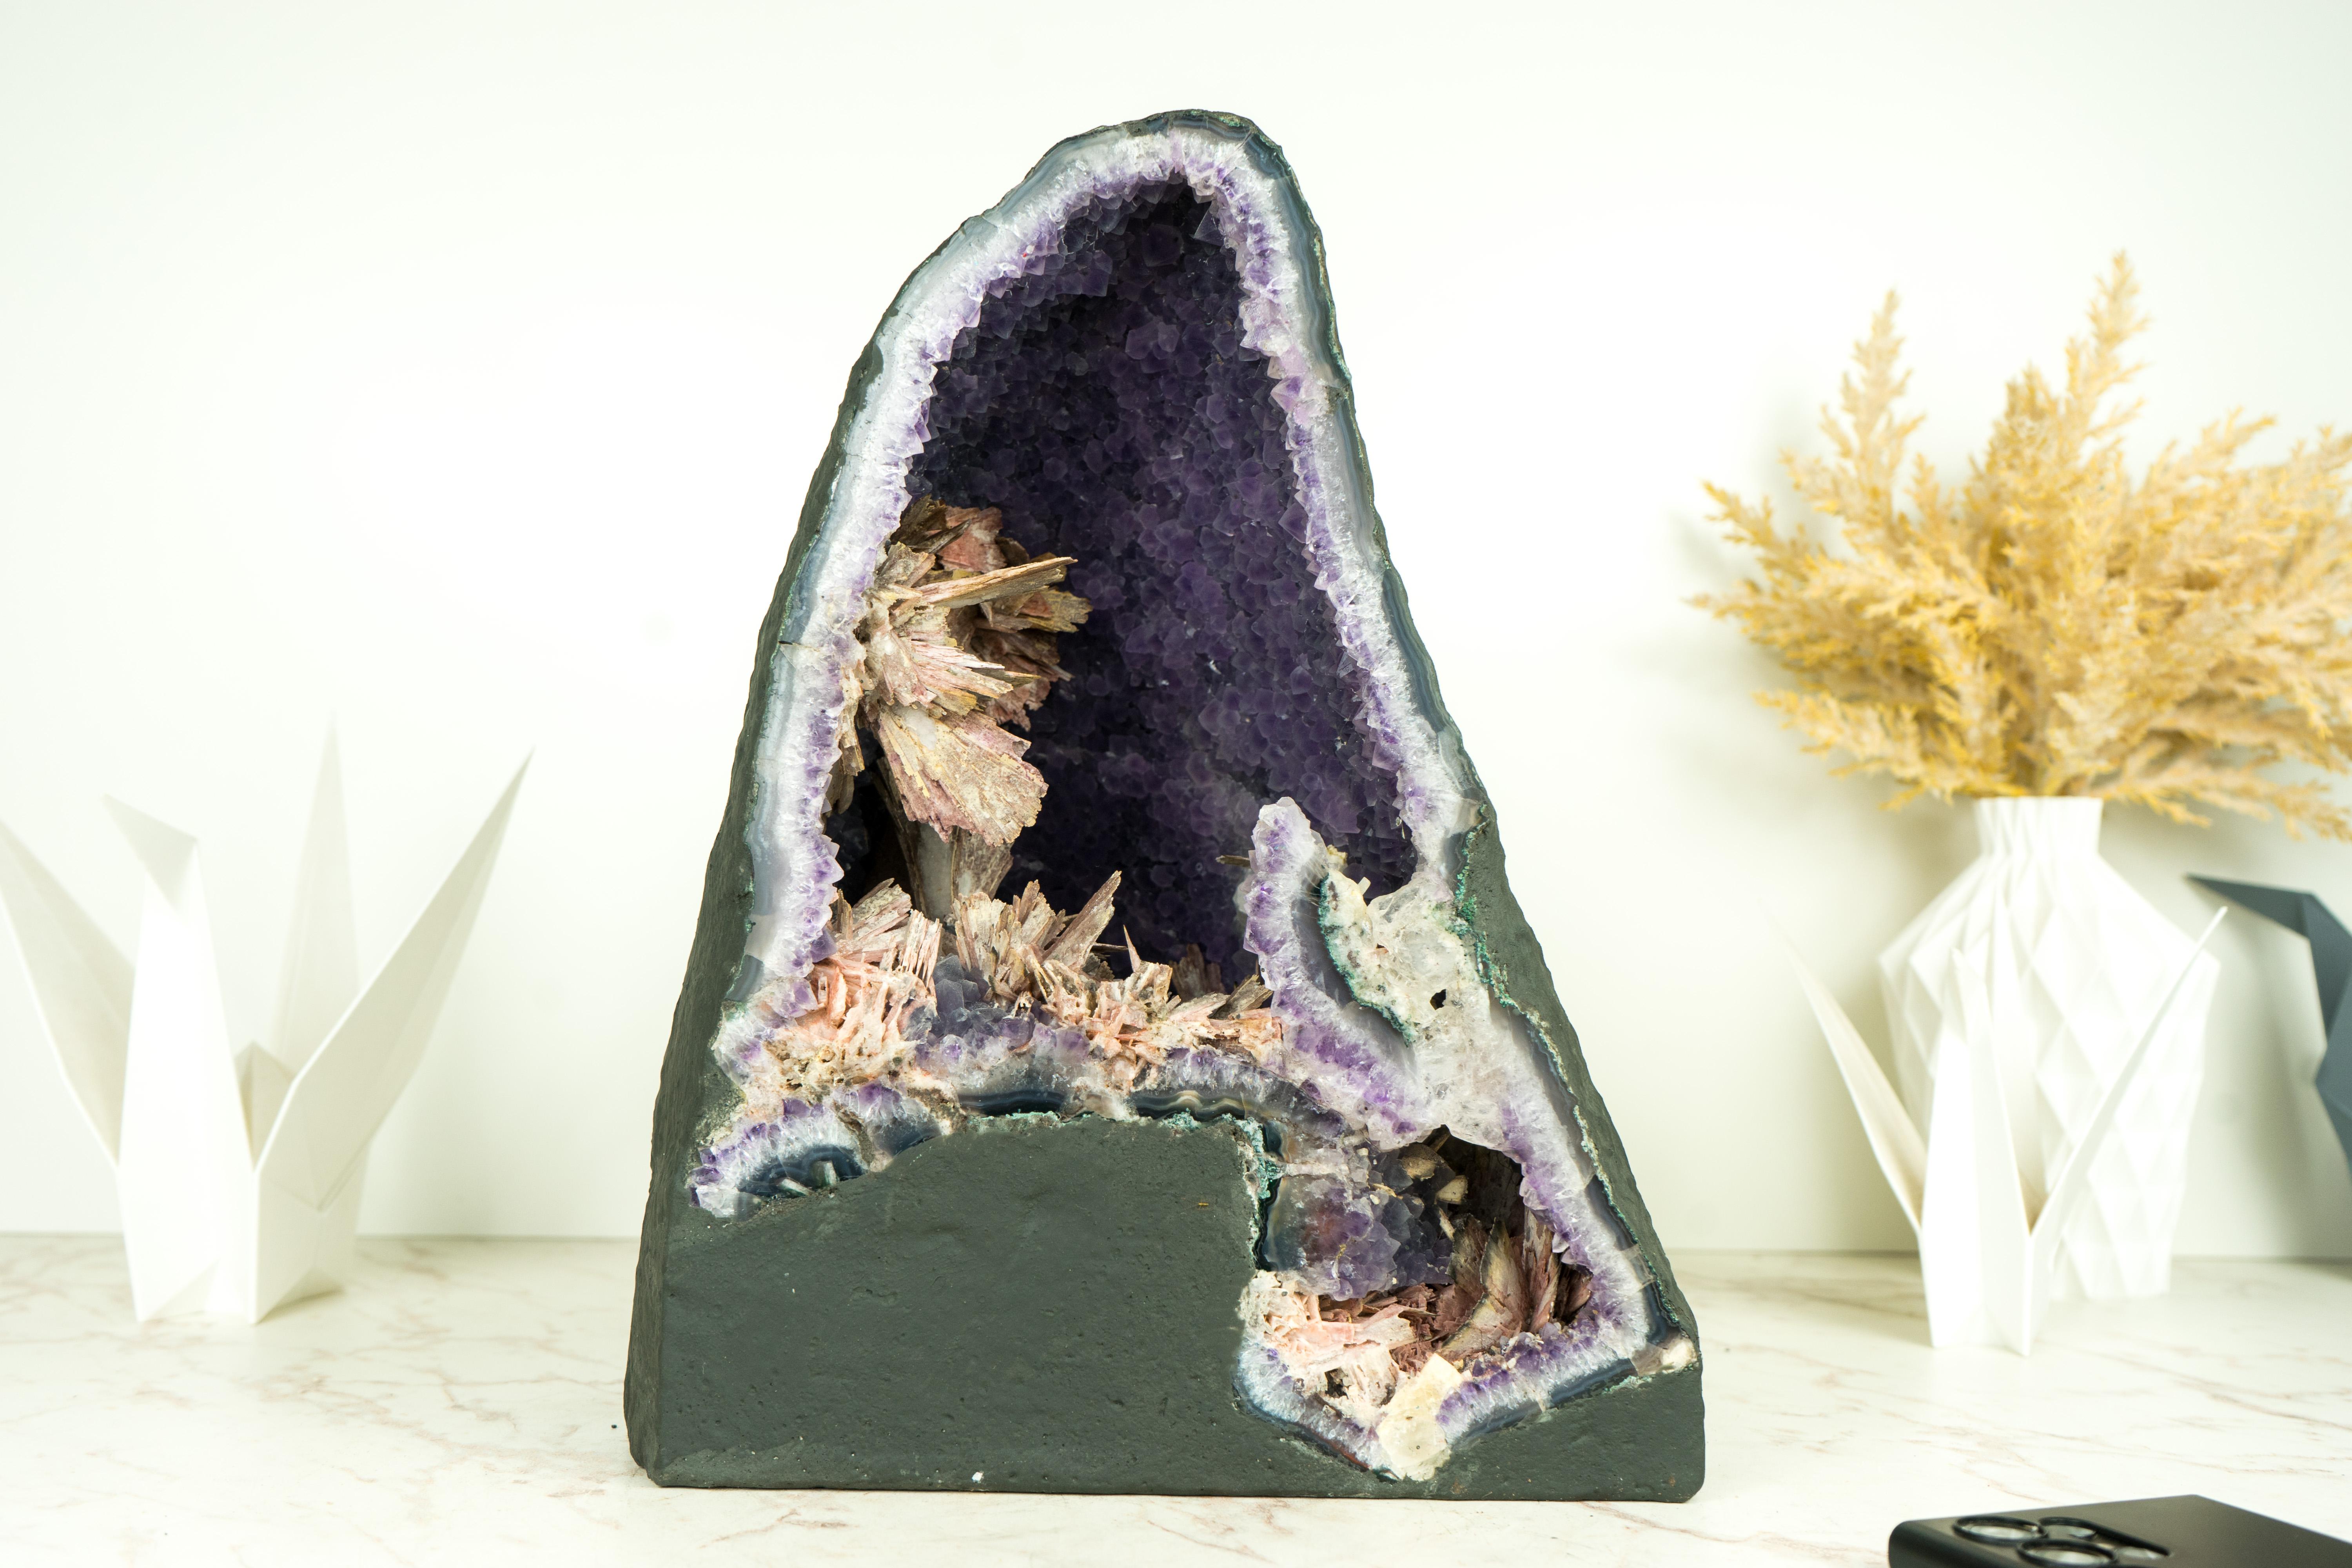 Elegant and sculptural, this geode showcases some of the rarest elements found in any Amethyst. It features world-class Pink Pseudomorph flowers growing atop a beautiful, high-grade, second-generational Amethyst druzy. This specimen is a superb